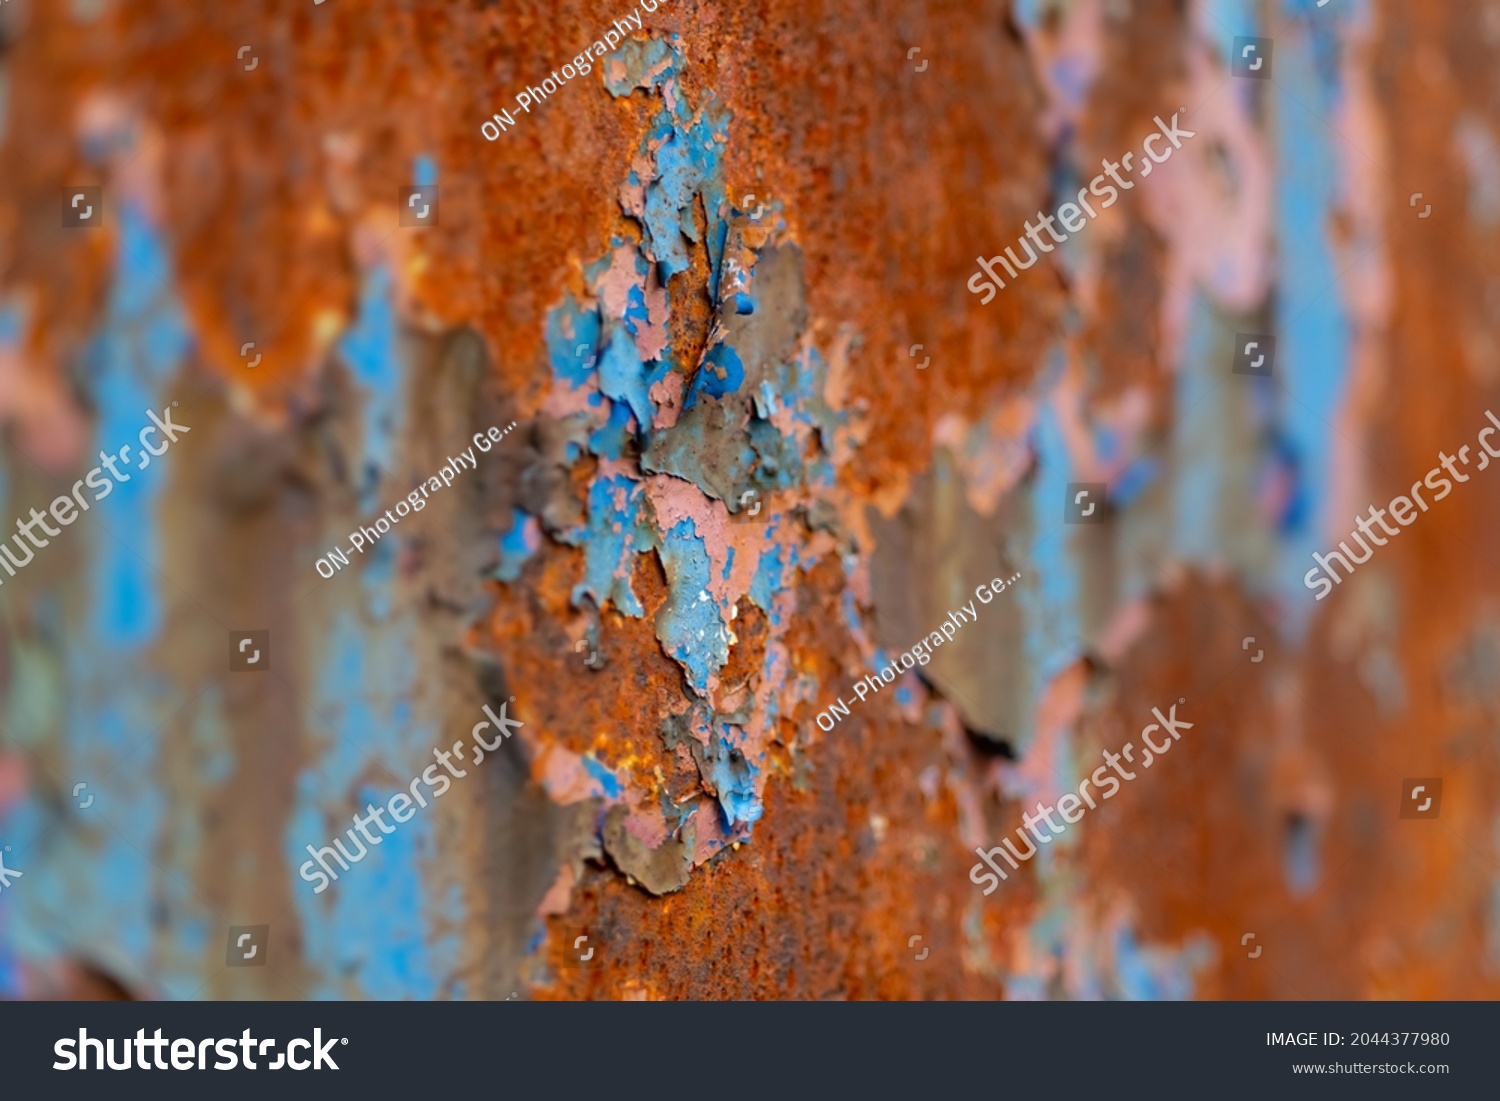 Peeled off paint on rusty vehicle surface of a ruined train. Vintage metal background with wheathered rotten color and massive corrosion in shades of blue, brown and turqouise with selective focus. #2044377980